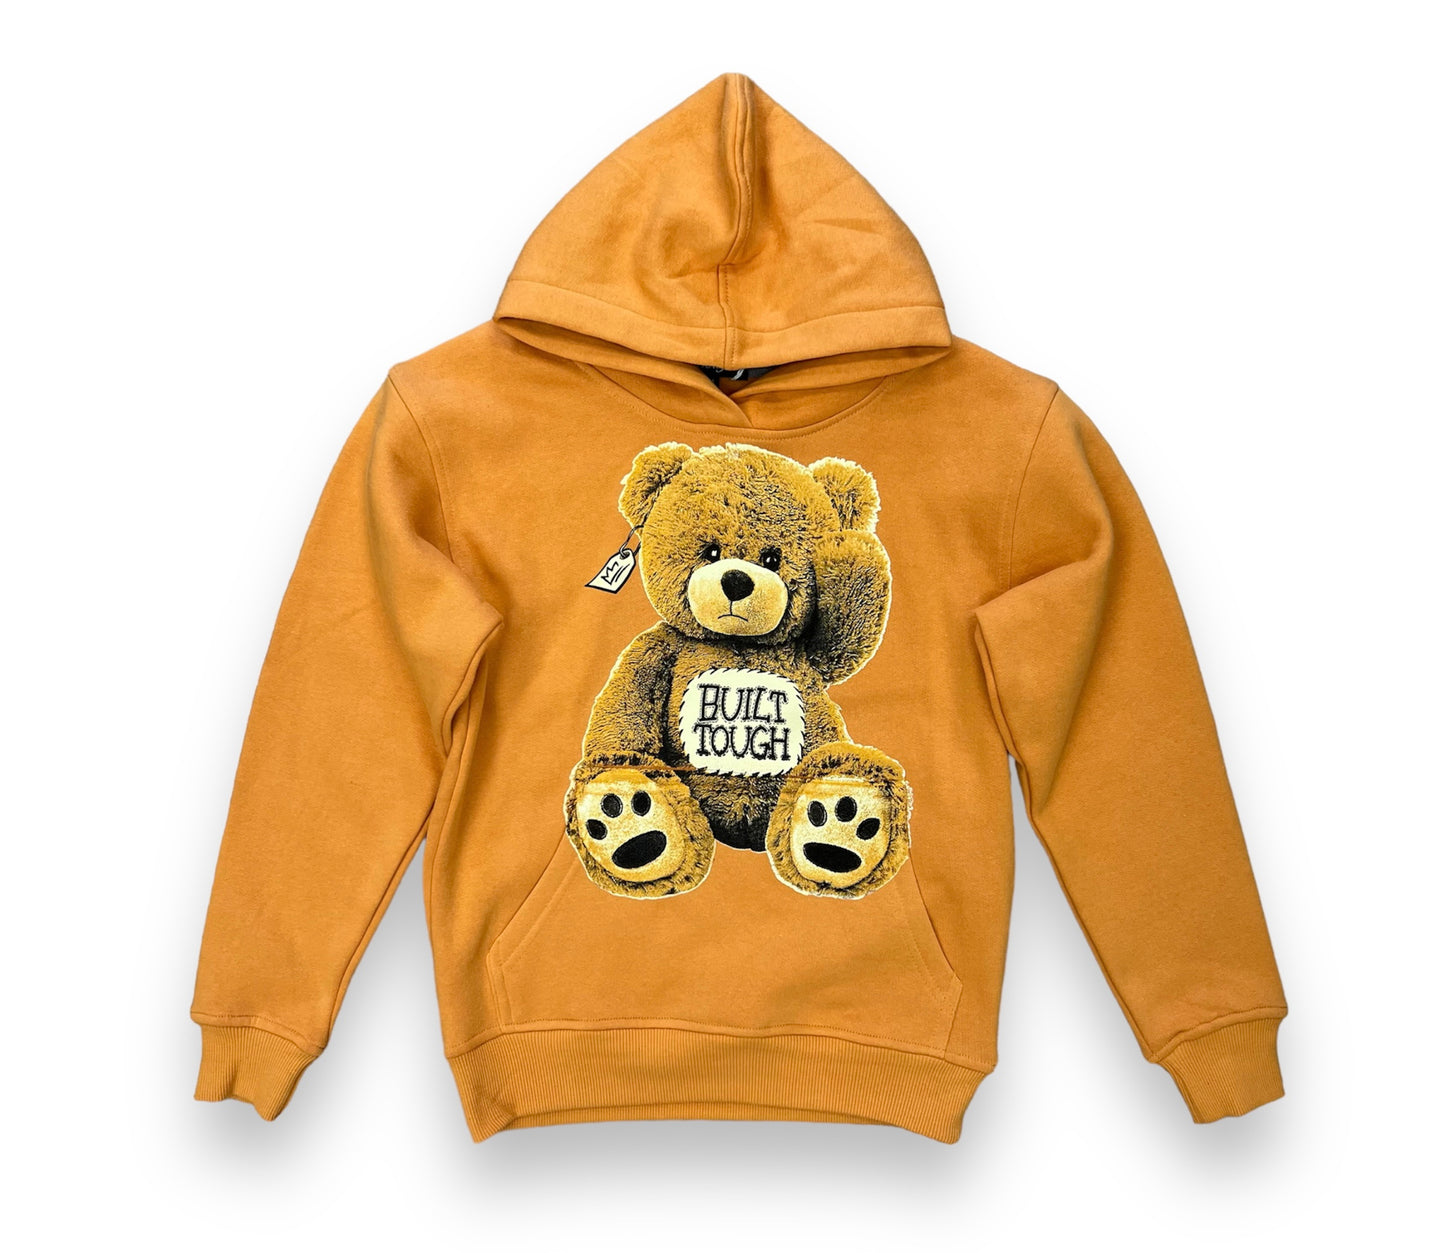 3FORTY BULIT TOUGH TIMPER BOY'S HOODIE